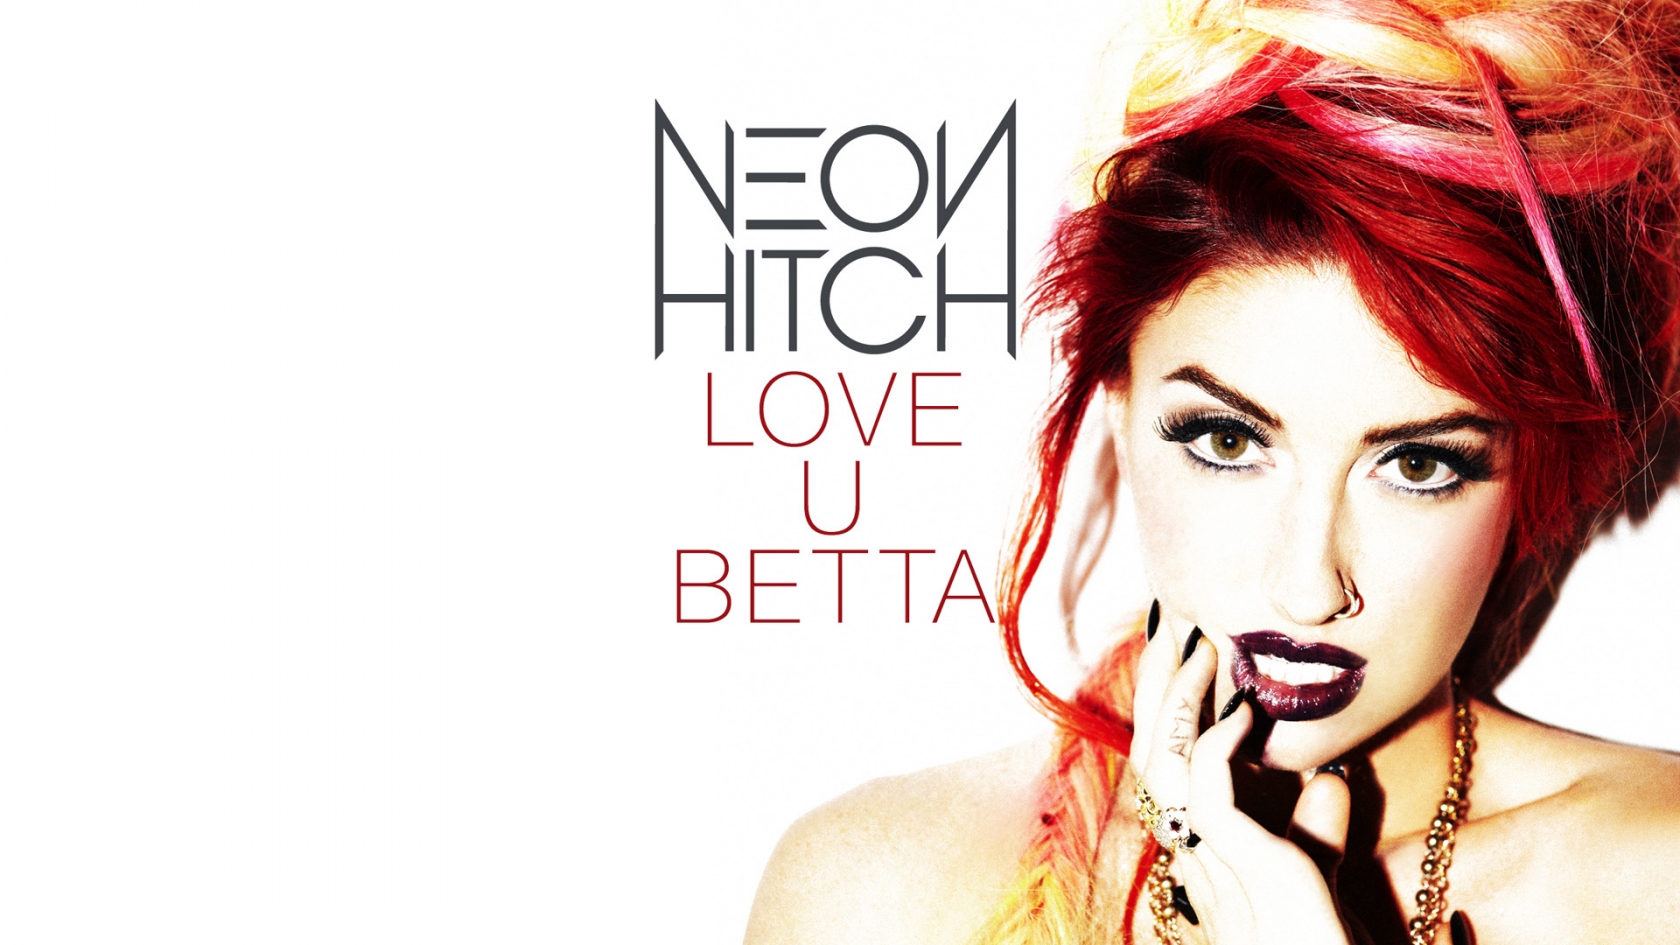 Beautiful Neon Hitch for 1680 x 945 HDTV resolution